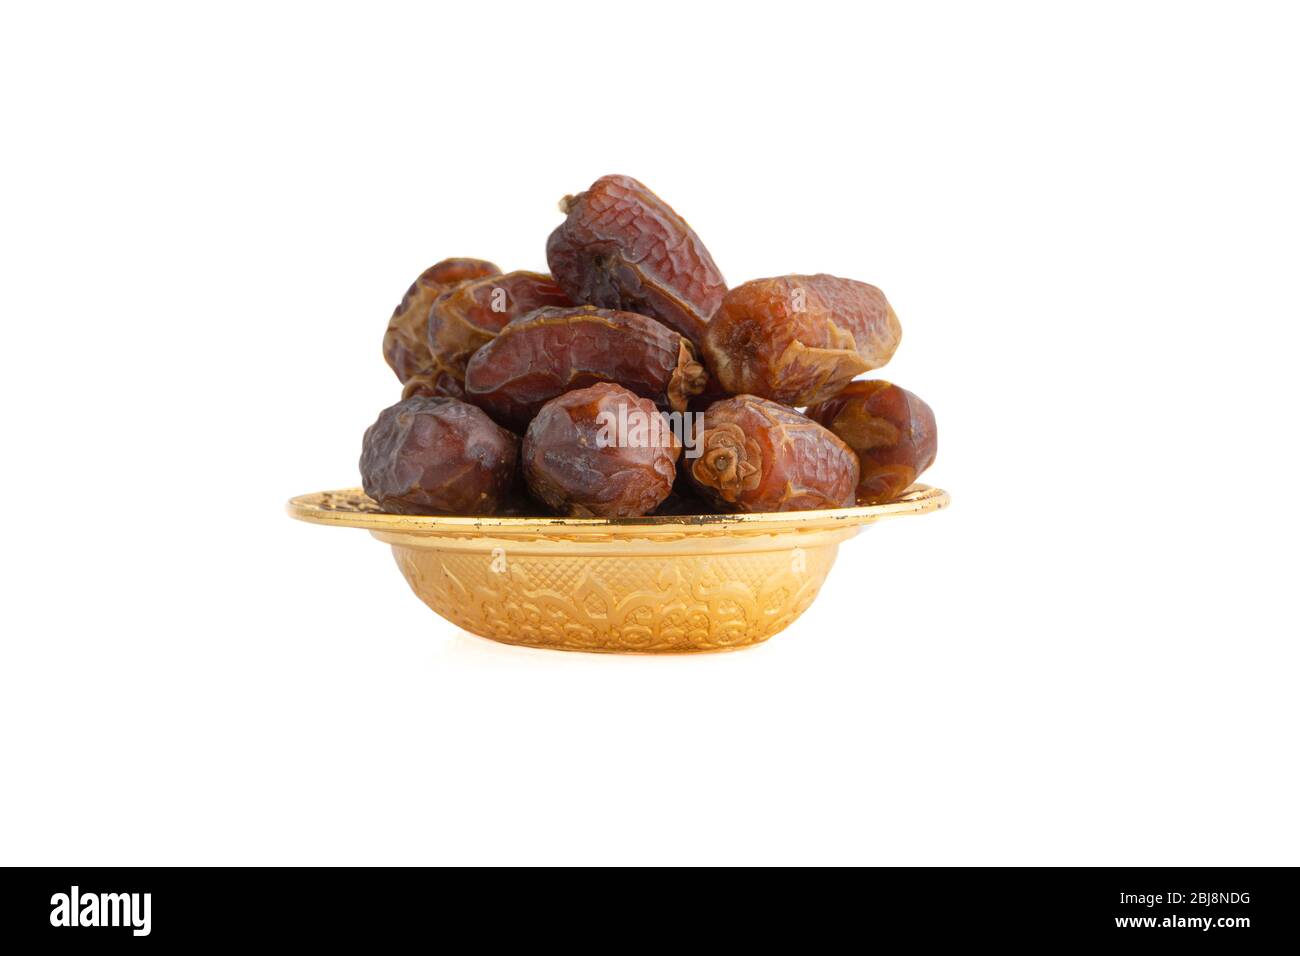 Date fruits or dry dates isolated on white background.Ramadan Kareem  Breaking the fast by eating Tamar Dates Stock Photo - Alamy